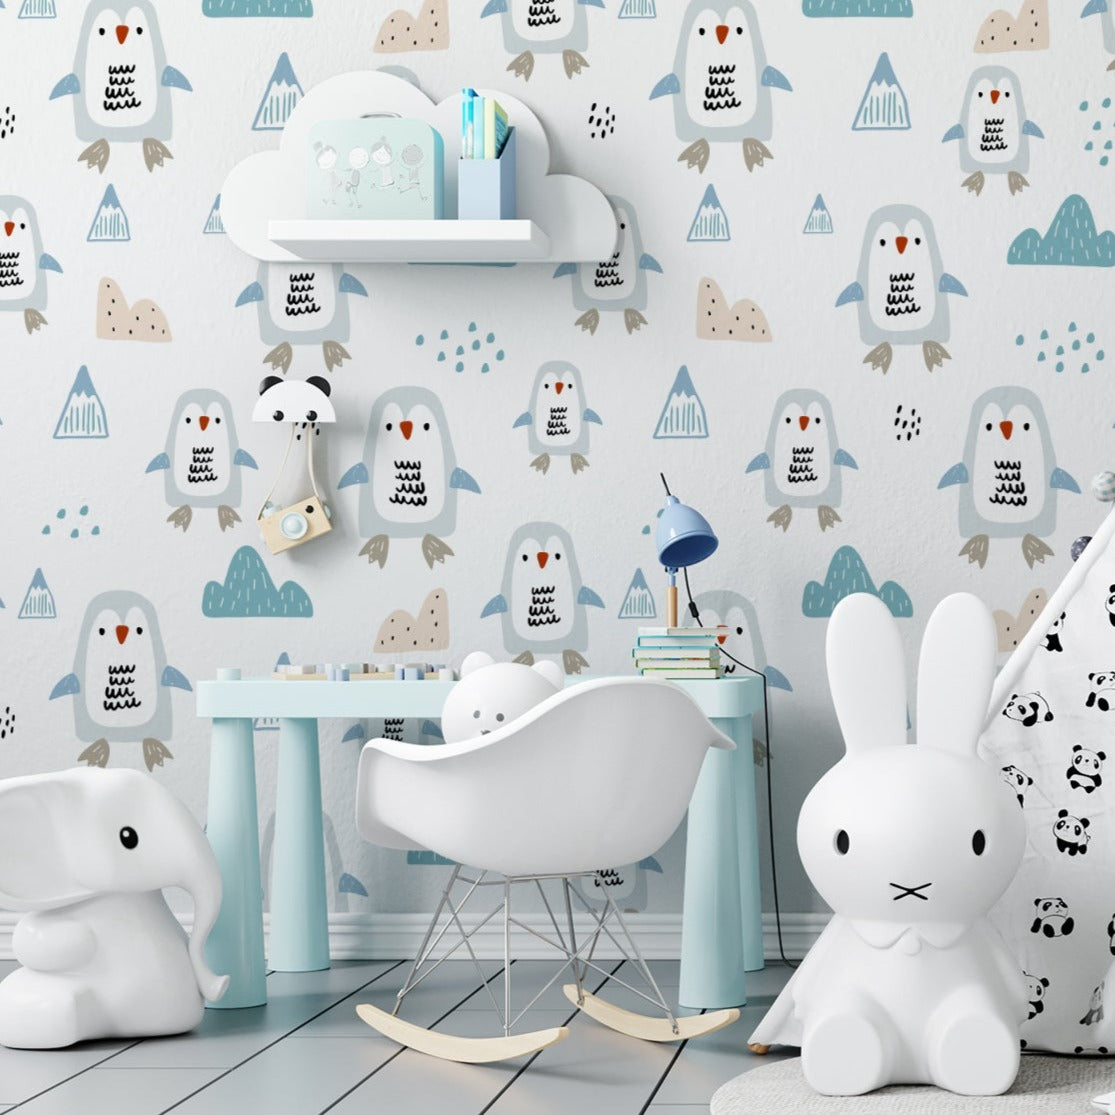 A playful children's room decorated with "Nordic Penguin Wallpaper," featuring a pattern of adorable cartoon penguins and small geometric mountain shapes in shades of blue, beige, and gray. The room is equipped with a white tent, children's furniture, and whimsical toys like a large elephant and rabbit figures, creating a fun and engaging atmosphere.